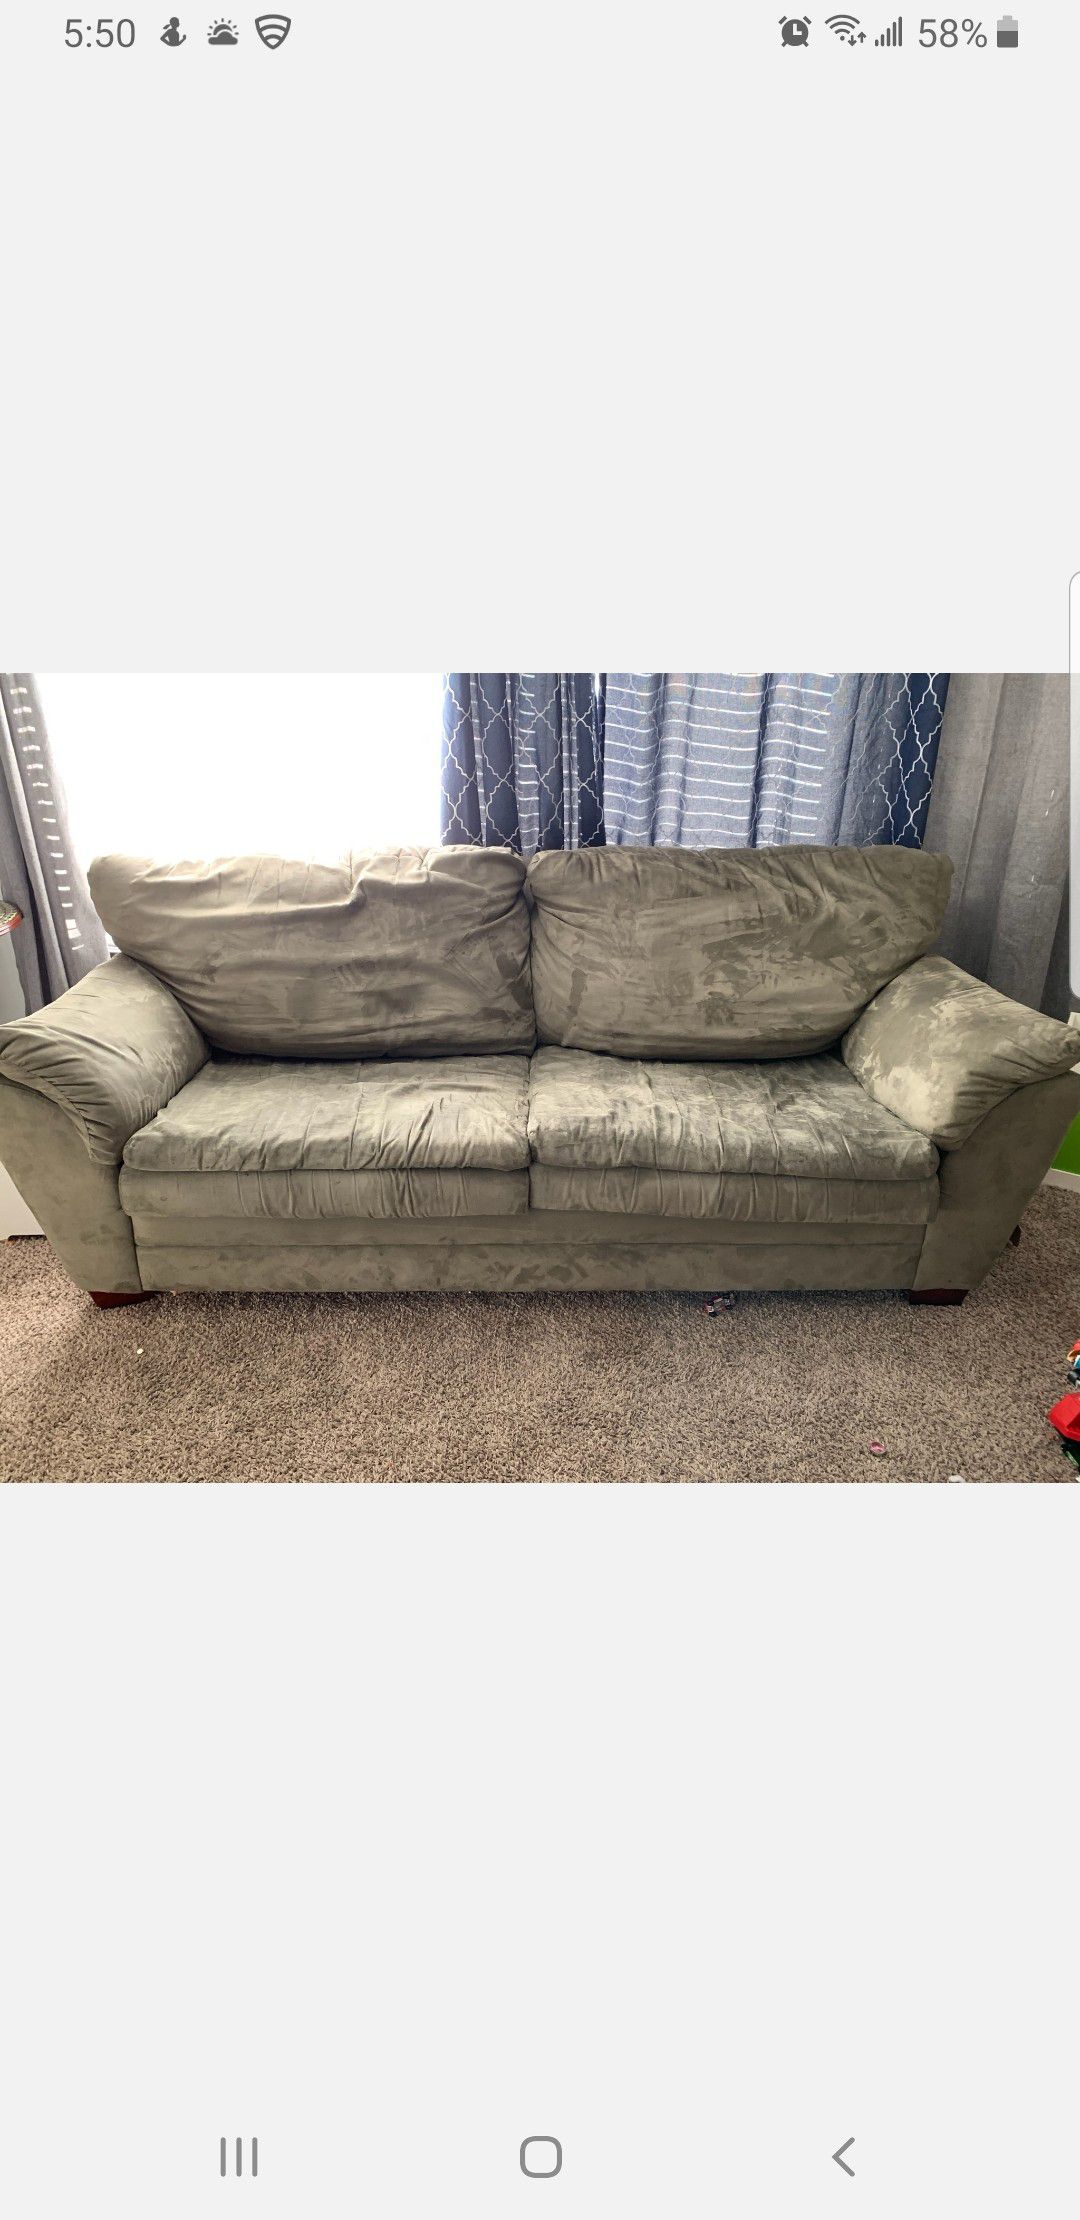 Free matching couches/sofas